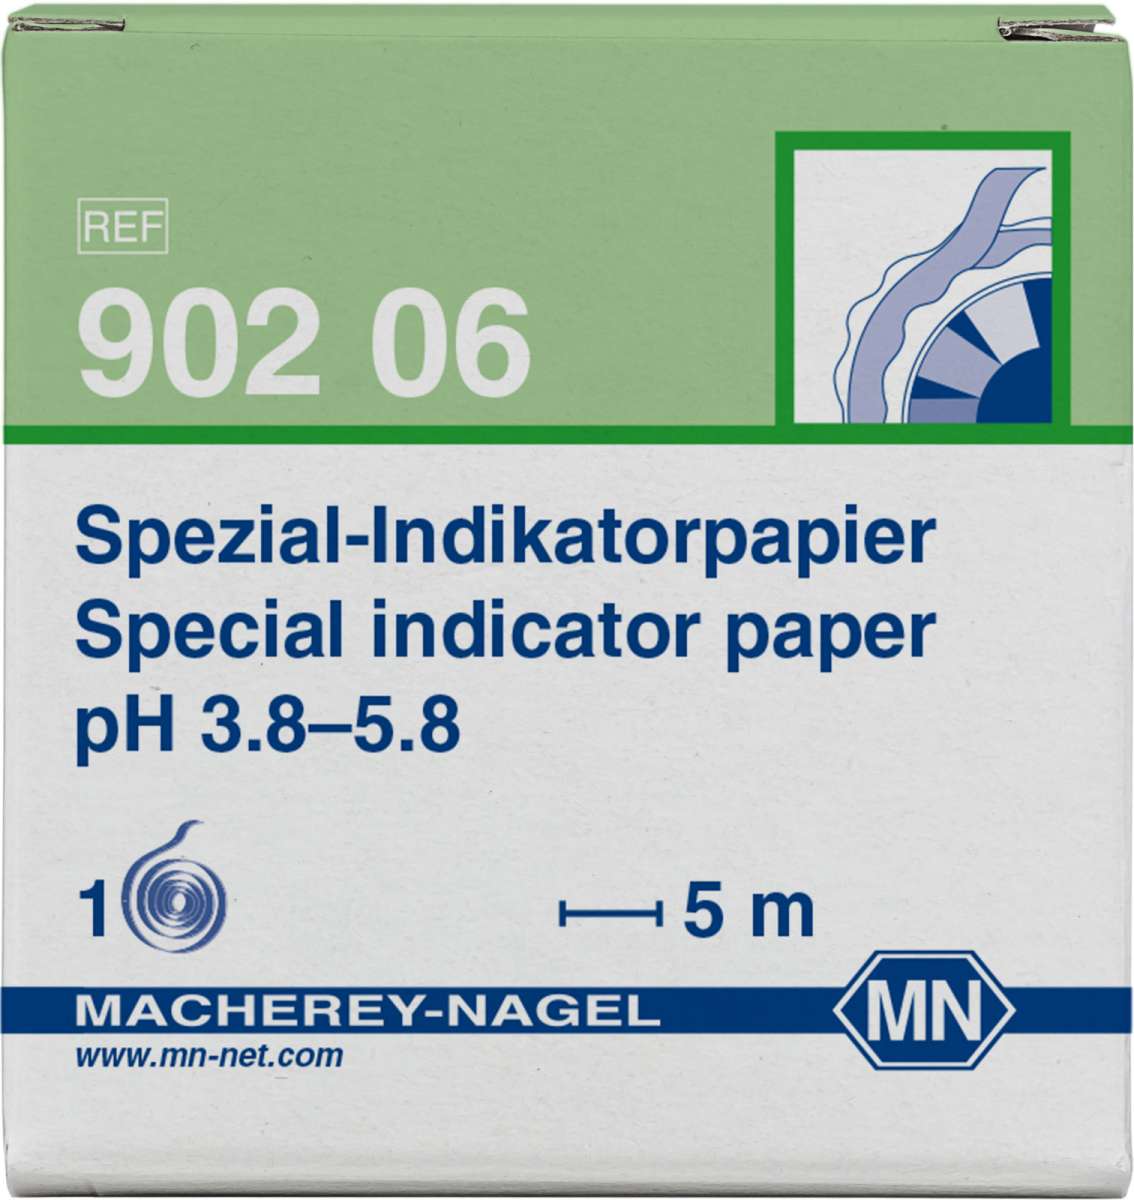 Special indicator paper pH 3.8 to 5.8 (Reel of 5m length and 7mm width)